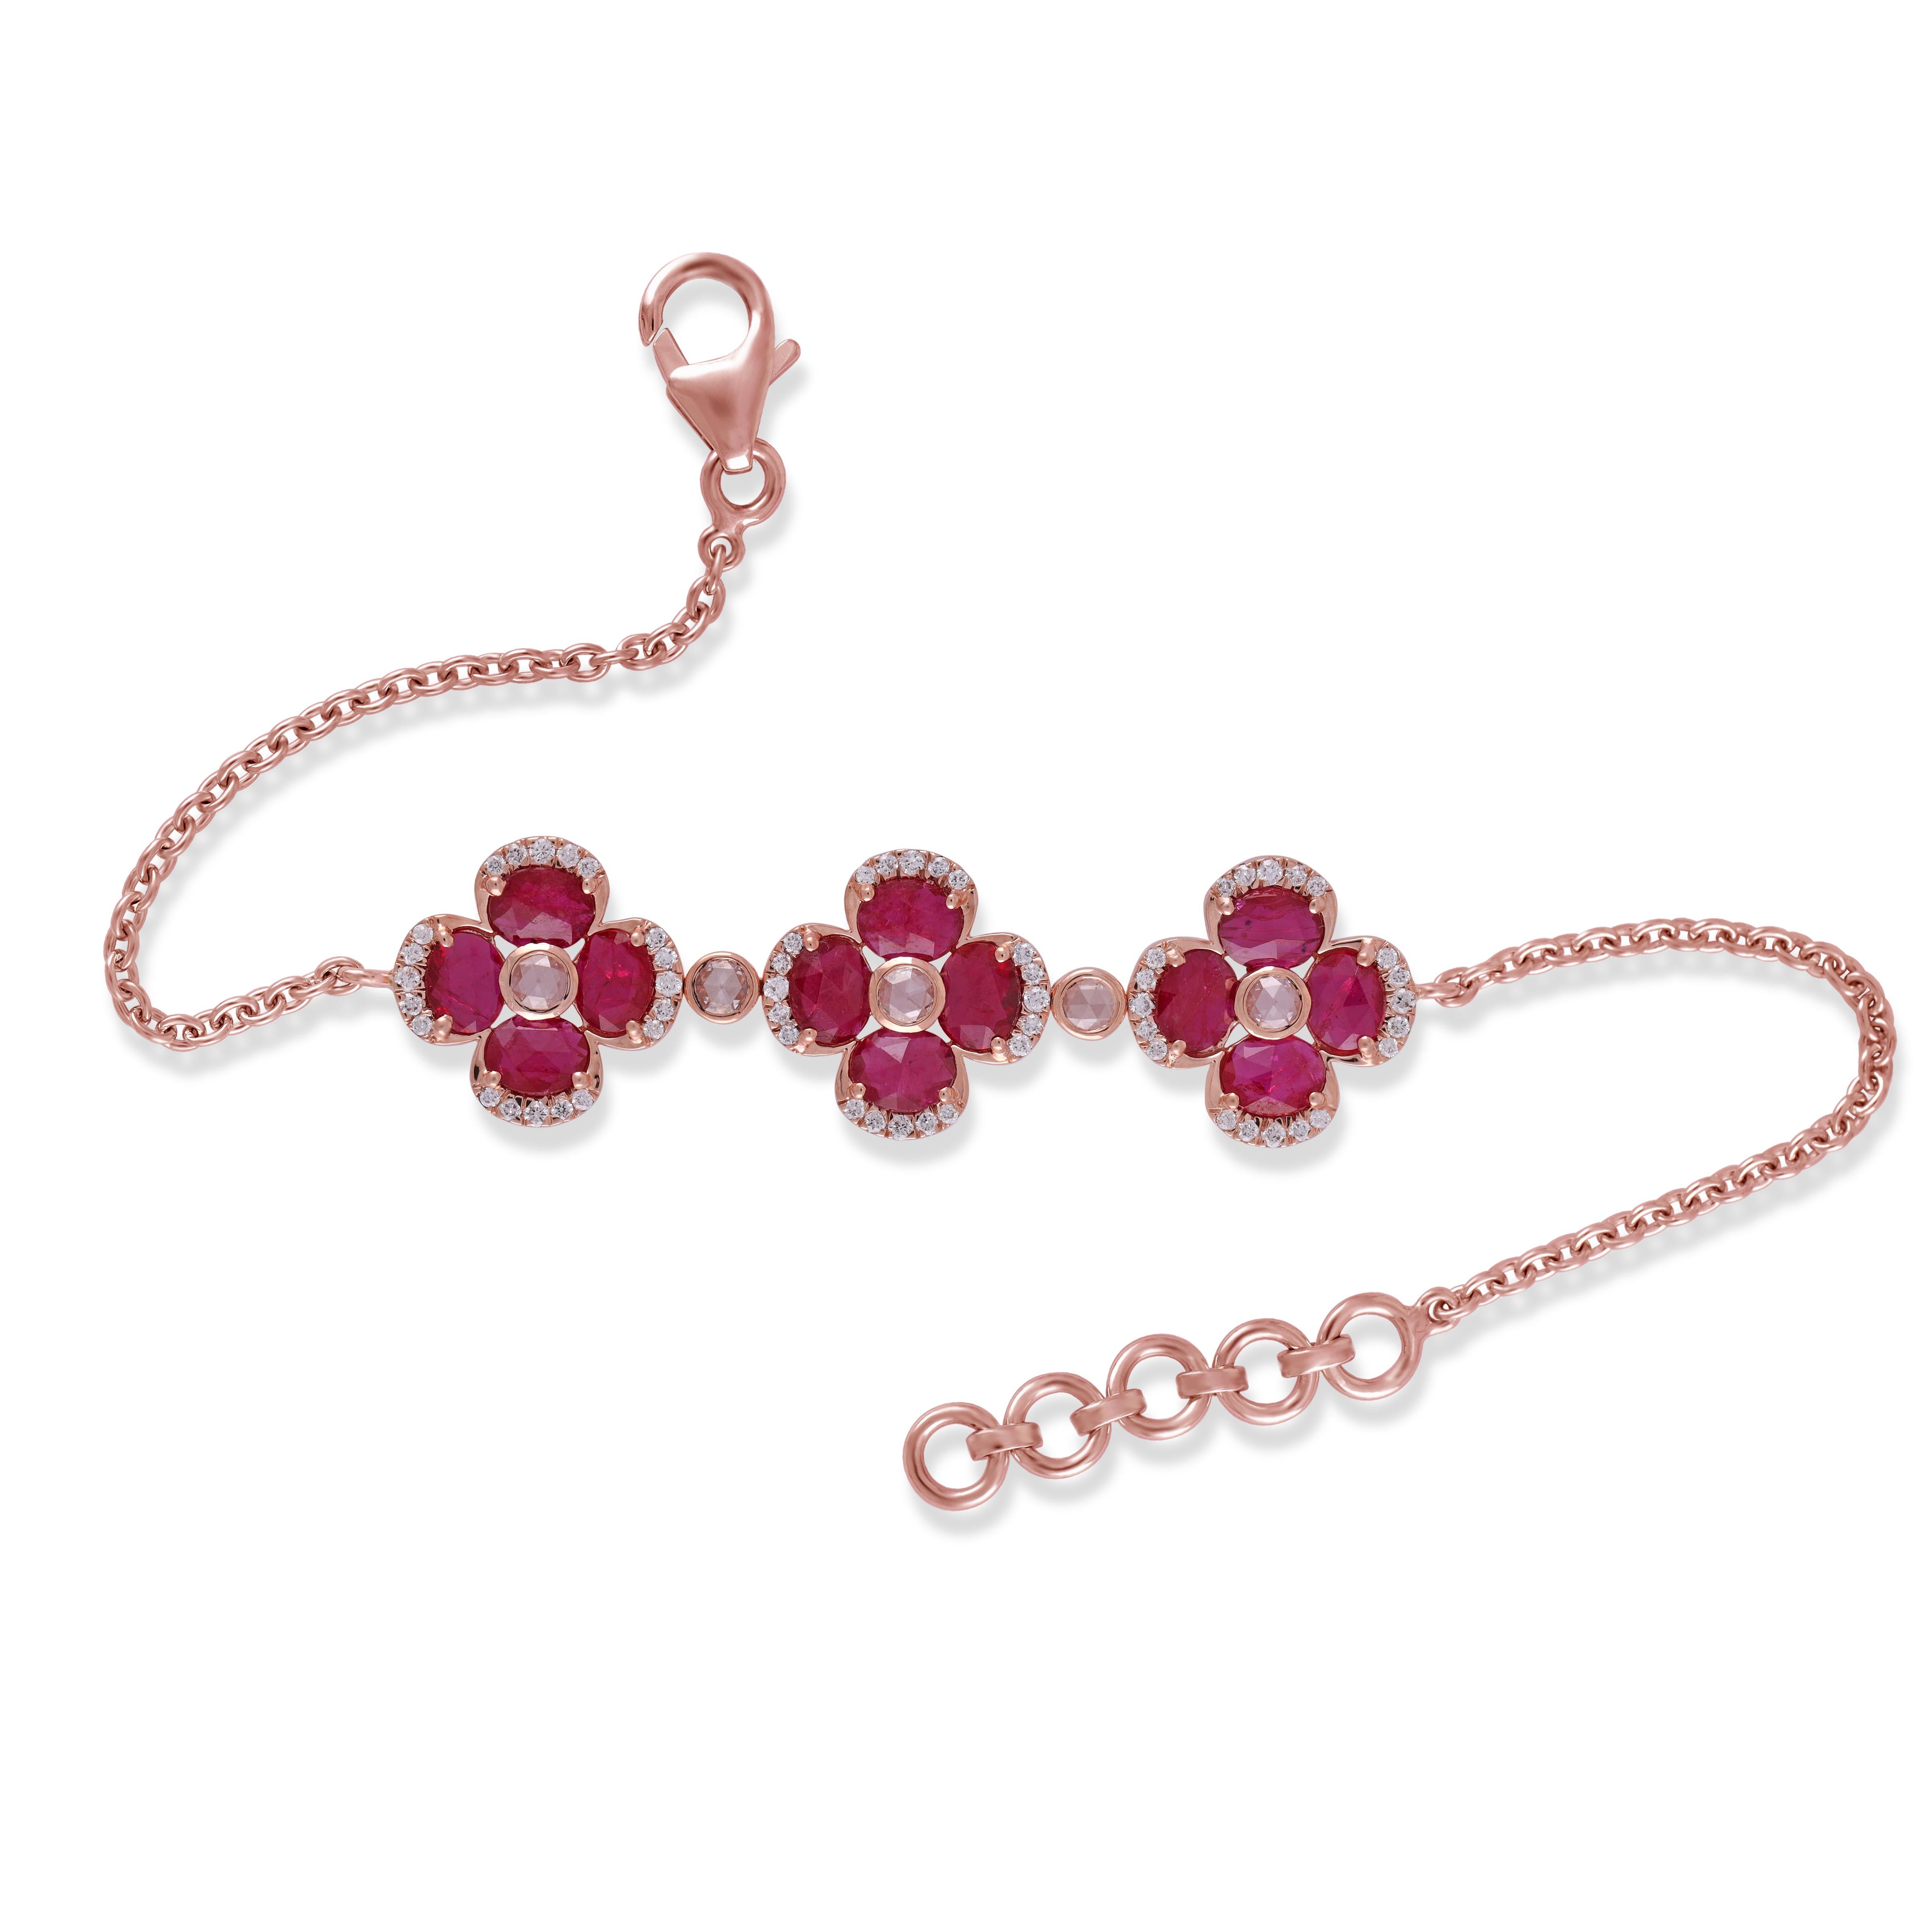 3.66 Carat Ruby 
 and Diamond  Bracelet in 18K Yellow Gold

This magnificent Oval shape Ruby Flower Bracelet is incredulous. The solitaire Oval-shaped Oval-cut Ruby are beautifully With Single Rose cut Diamonds & Small Diamond making the bracelet